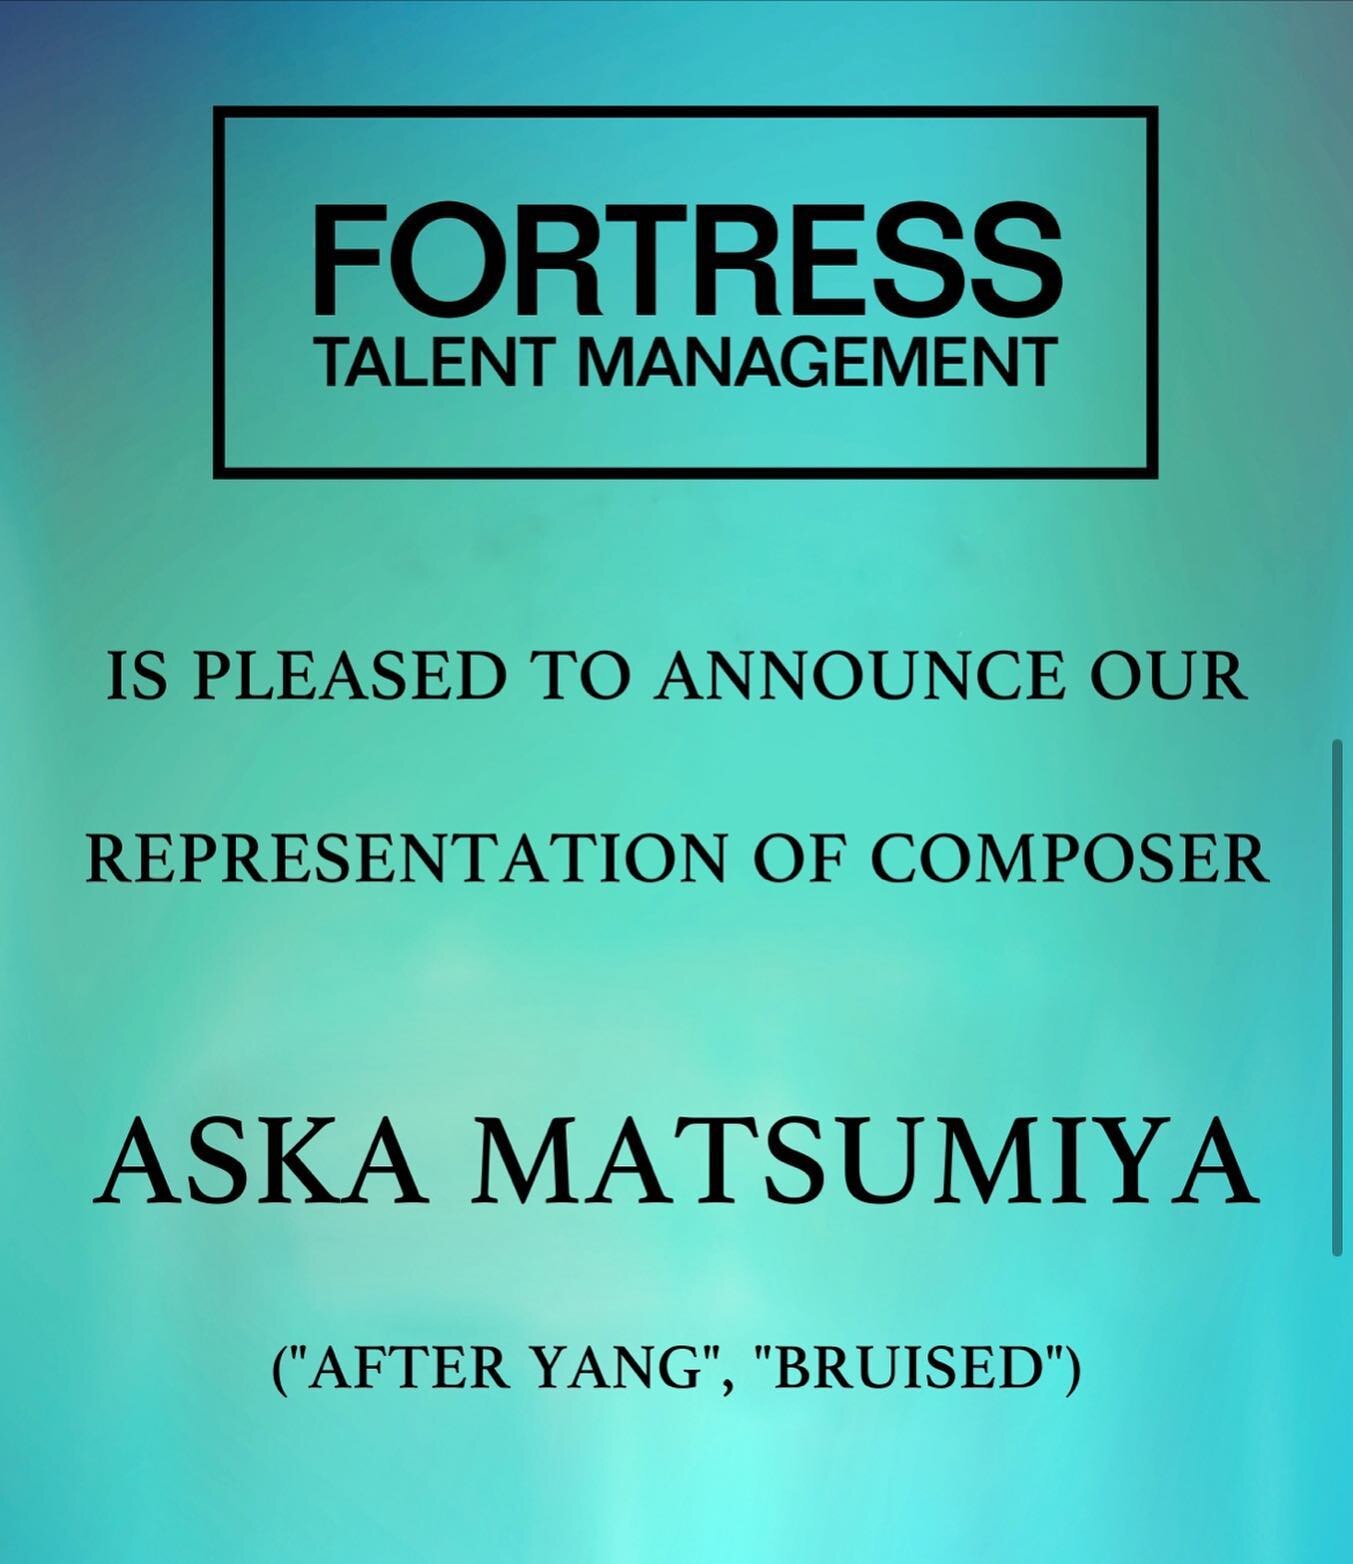 I joined fortress management alongside with some of my fav composers (Ryuichi Sakamoto, Nicholas Britell, Dan Romer, &Oacute;lafur Arnalds etc&hellip;) 

🫶🏻

Excited for the new chapter 🏄🏻&zwj;♀️